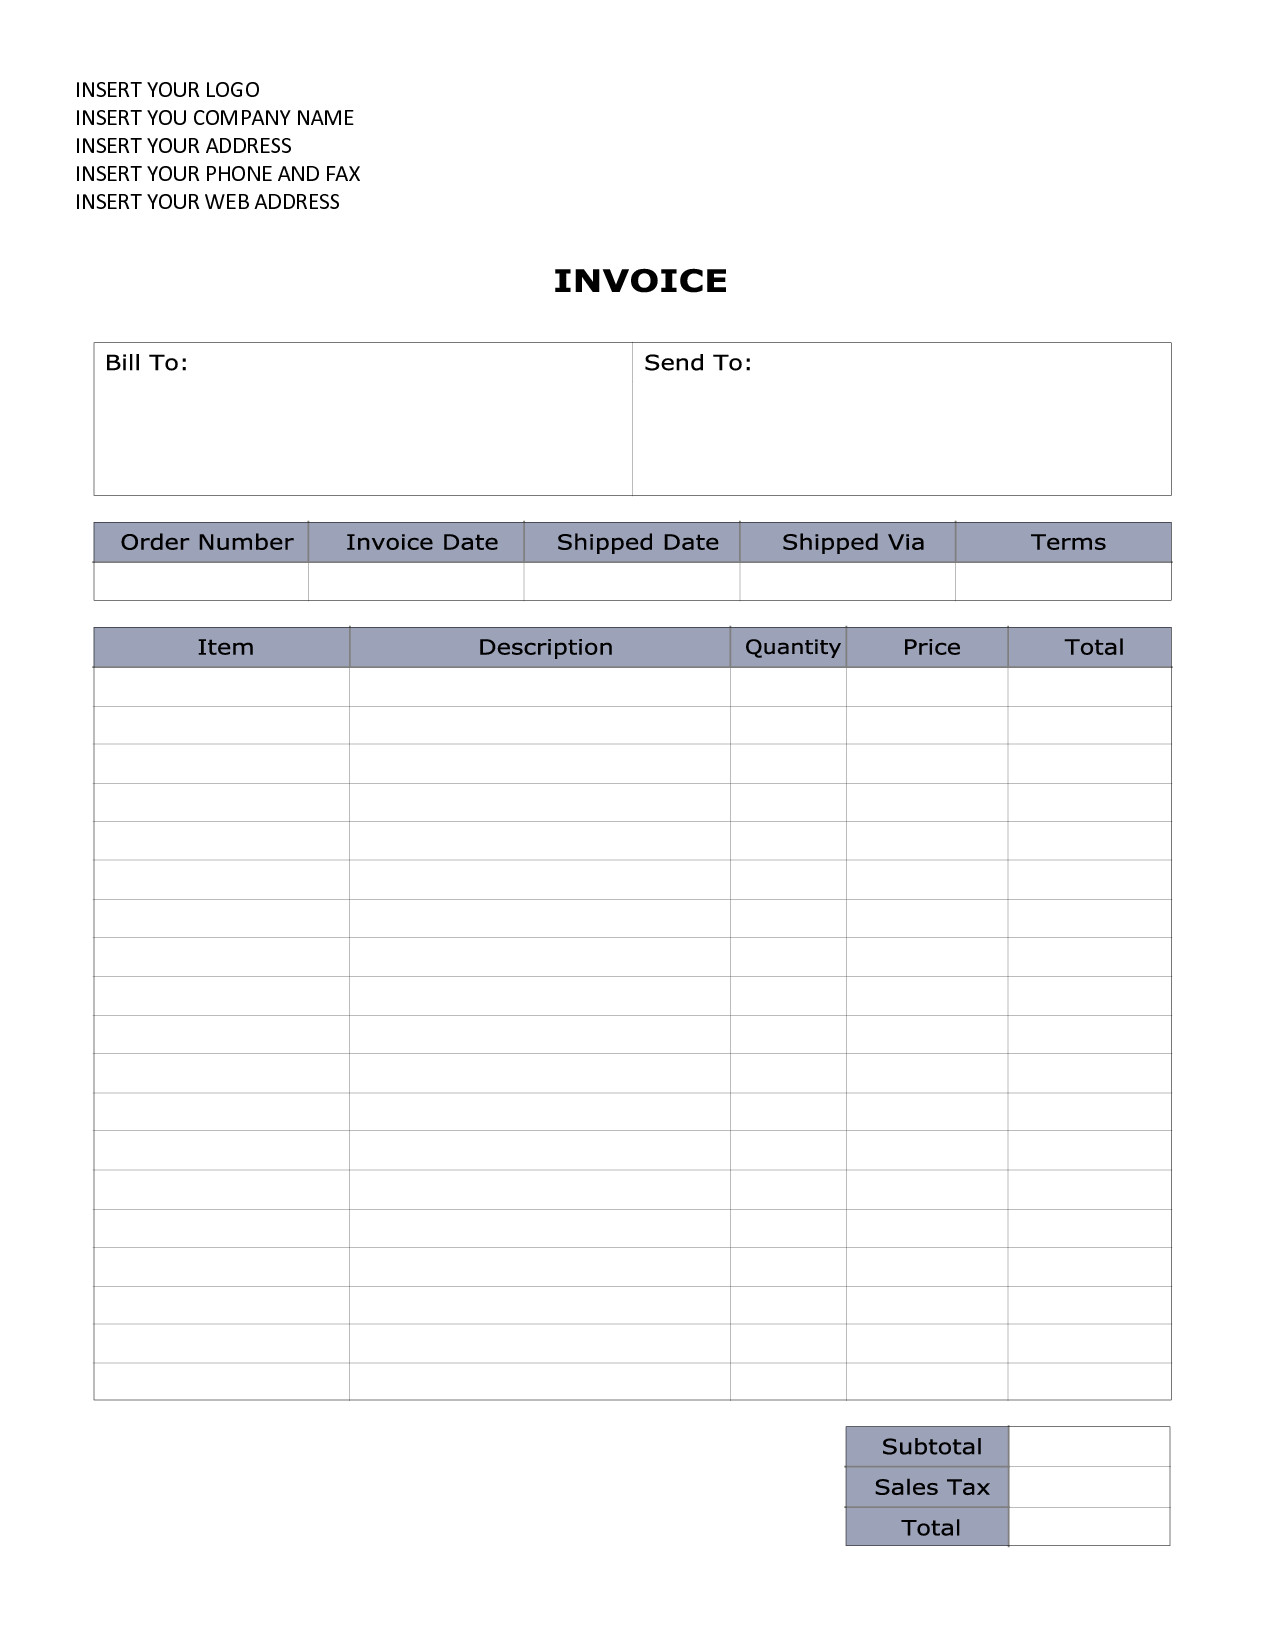 Basic Invoice Template Word Invoice Template Word 2010